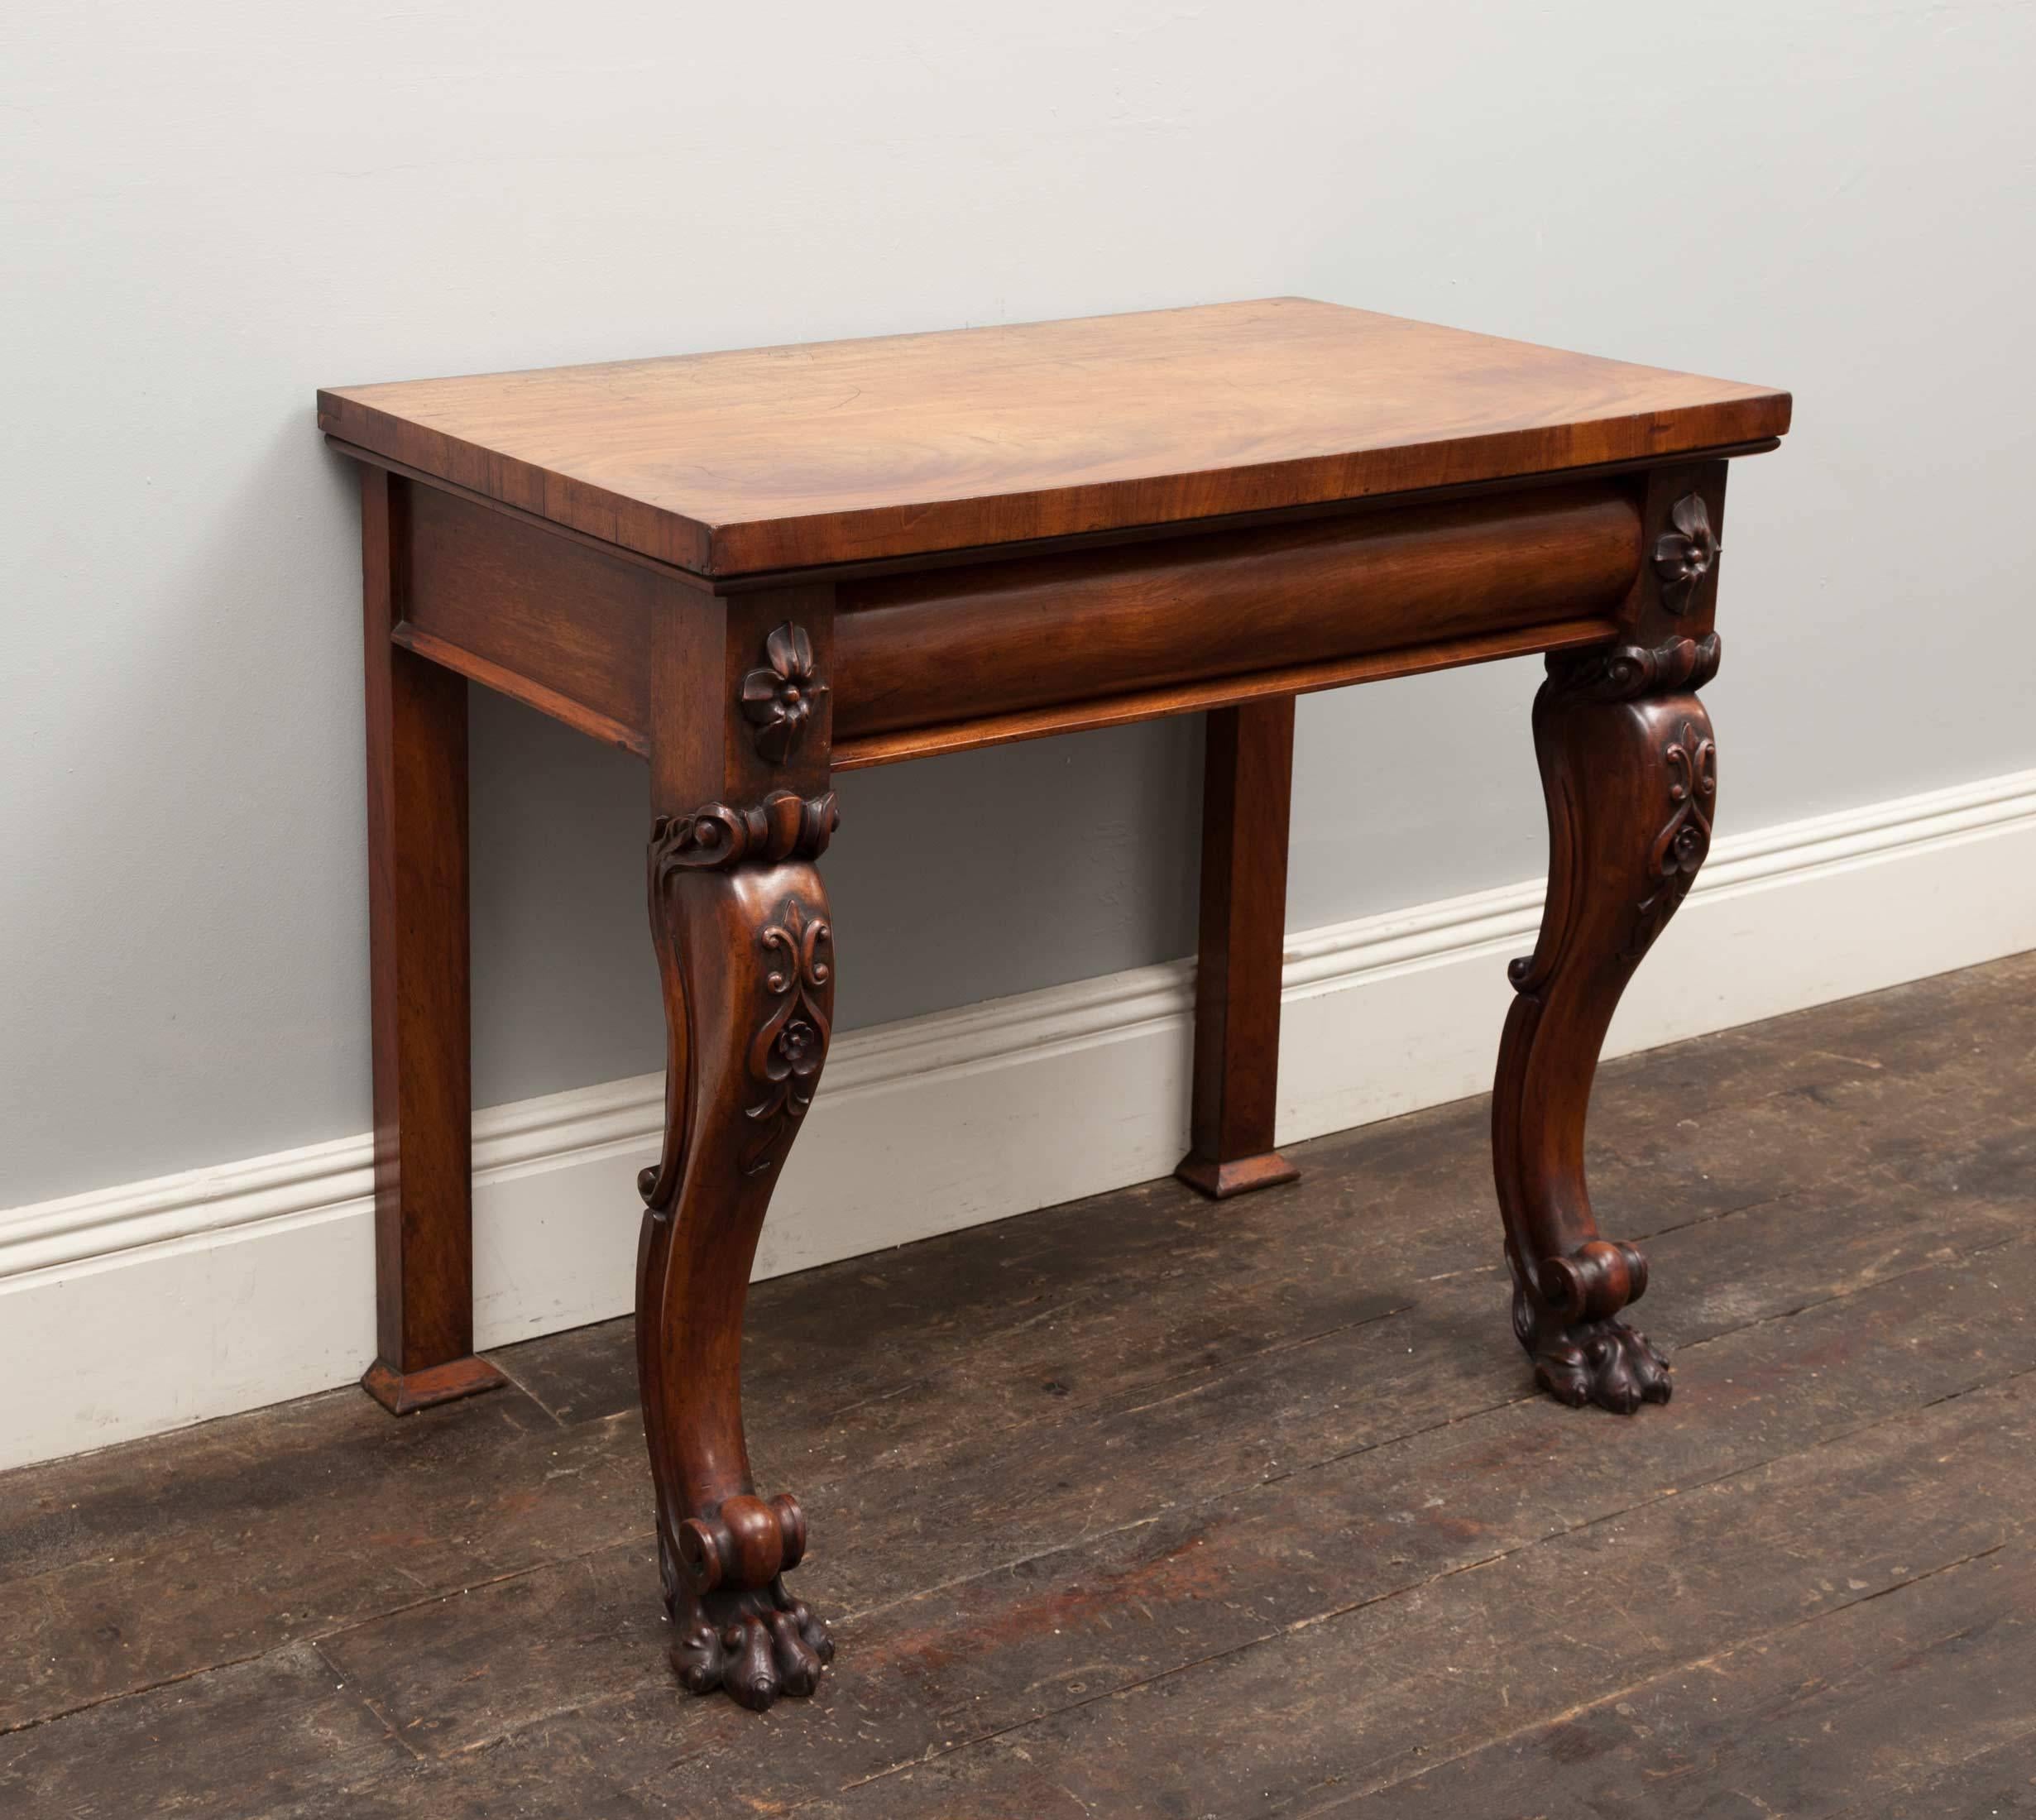 An antique mahogany console table of fine quality and proportions. The two front scrolled legs with carved knees terminate with paw feet. The pull-out drawer with a barrel shaped front is flanked by carved floral end-blocks.

This table is in